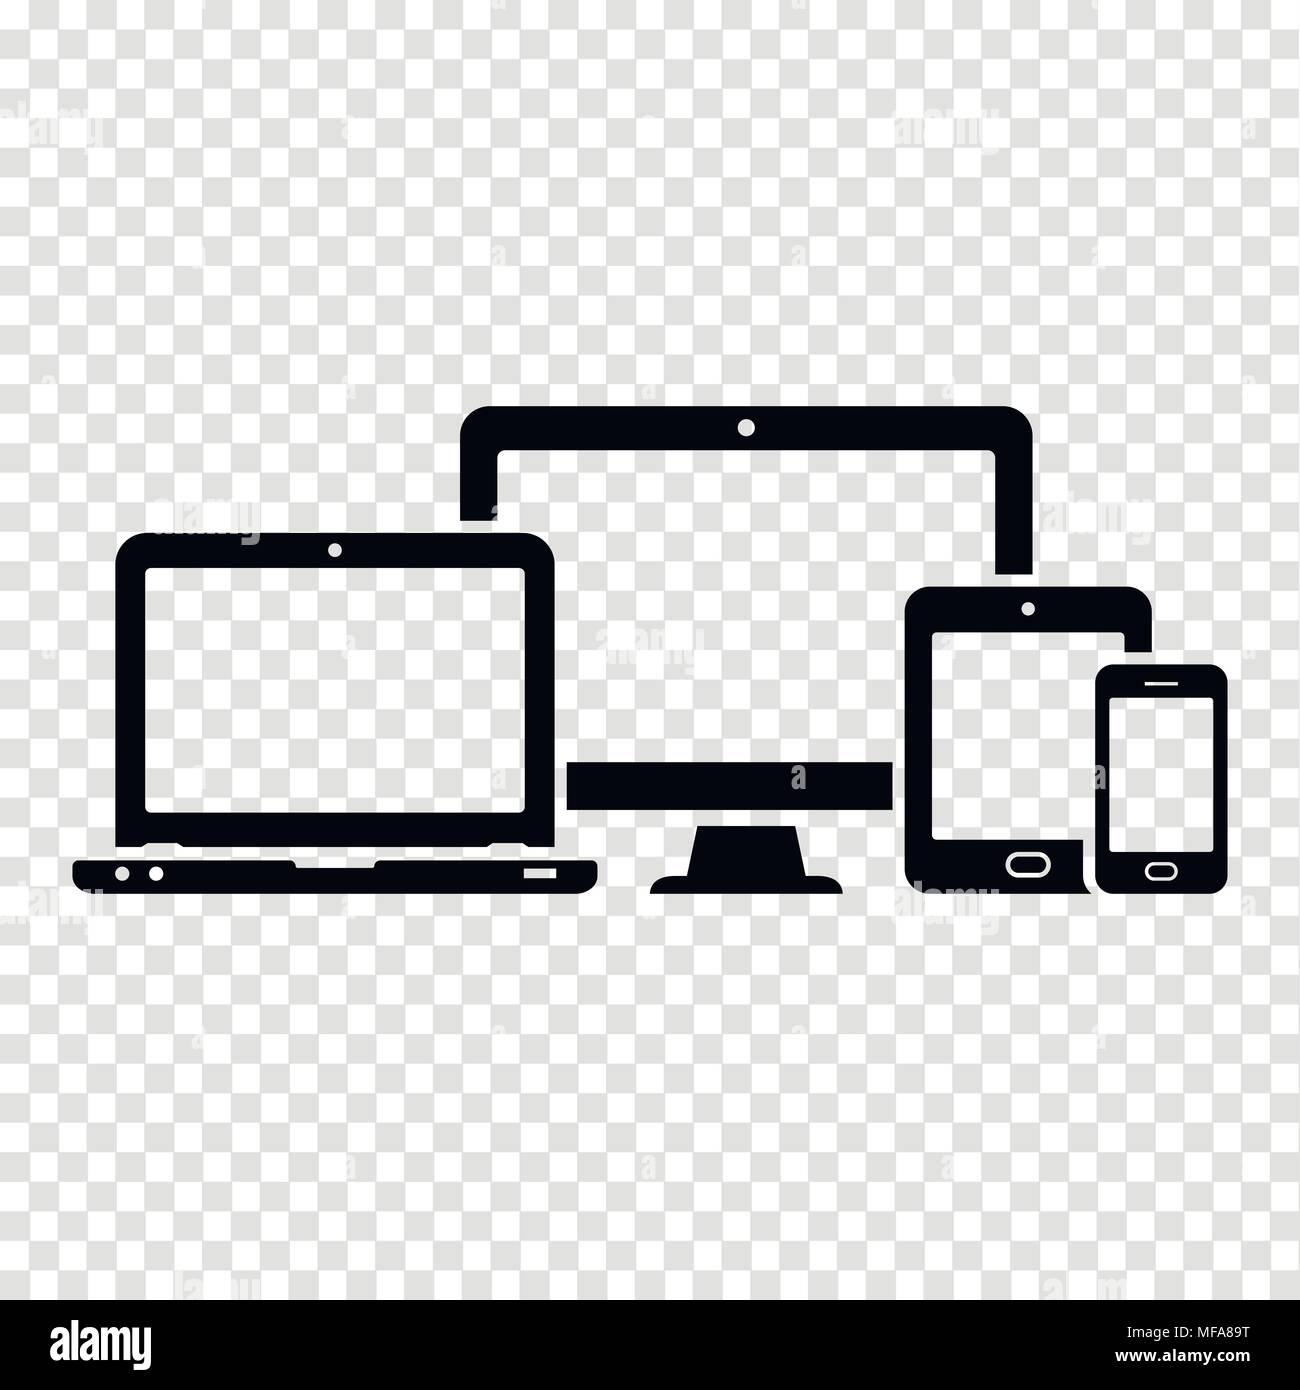 Responsive web design icons for computer monitor, smartphone, tablet and laptop. Vector illustration. Stock Vector